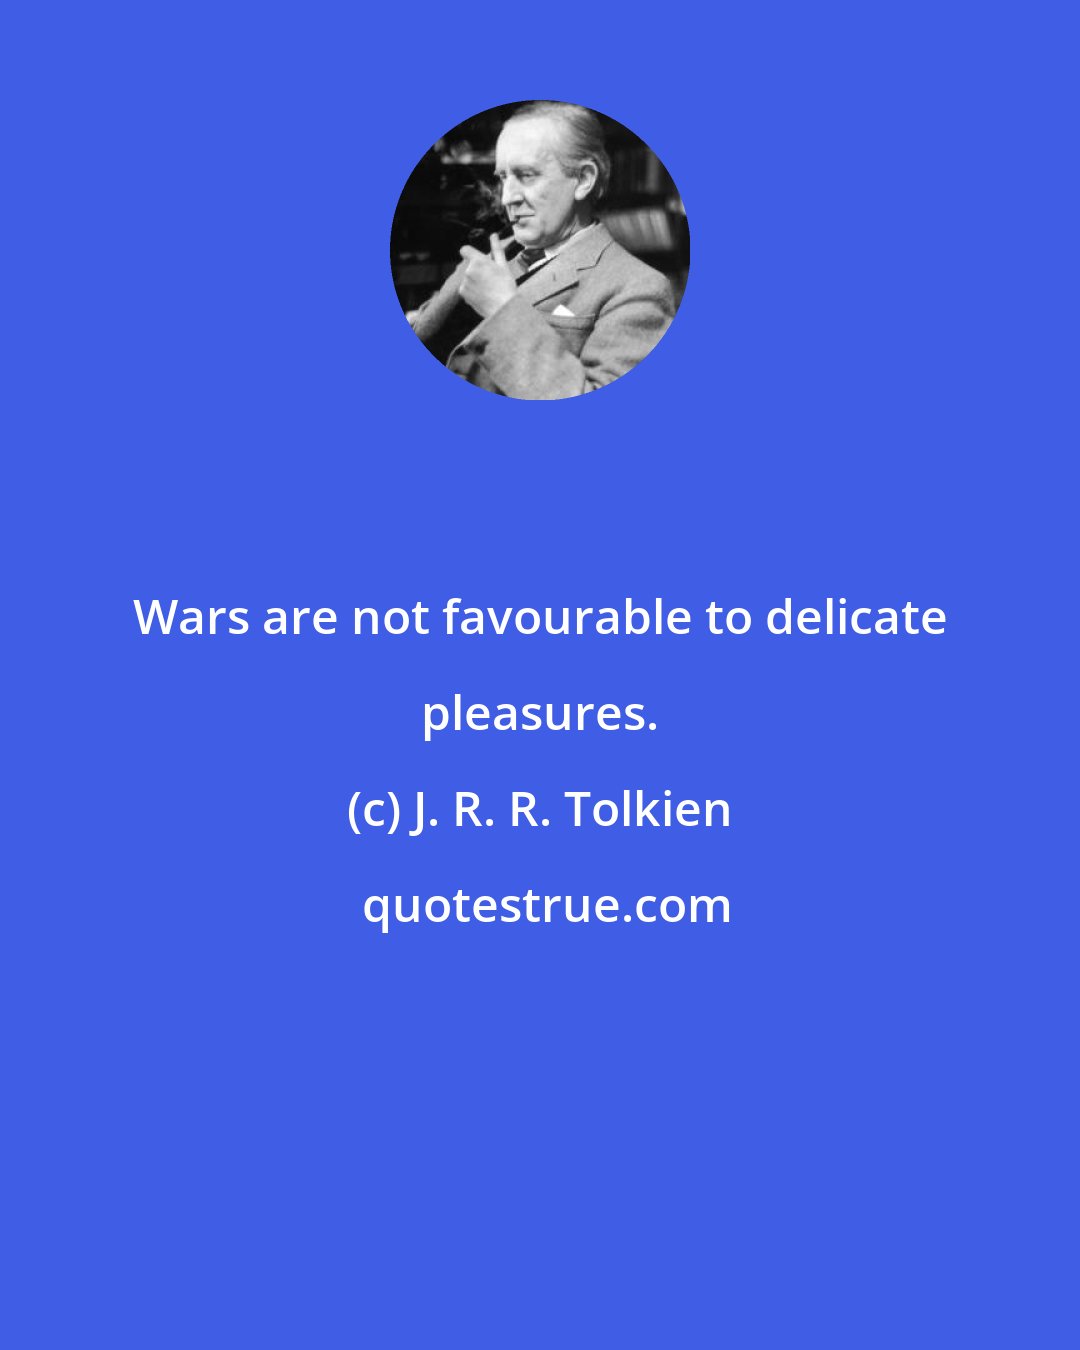 J. R. R. Tolkien: Wars are not favourable to delicate pleasures.